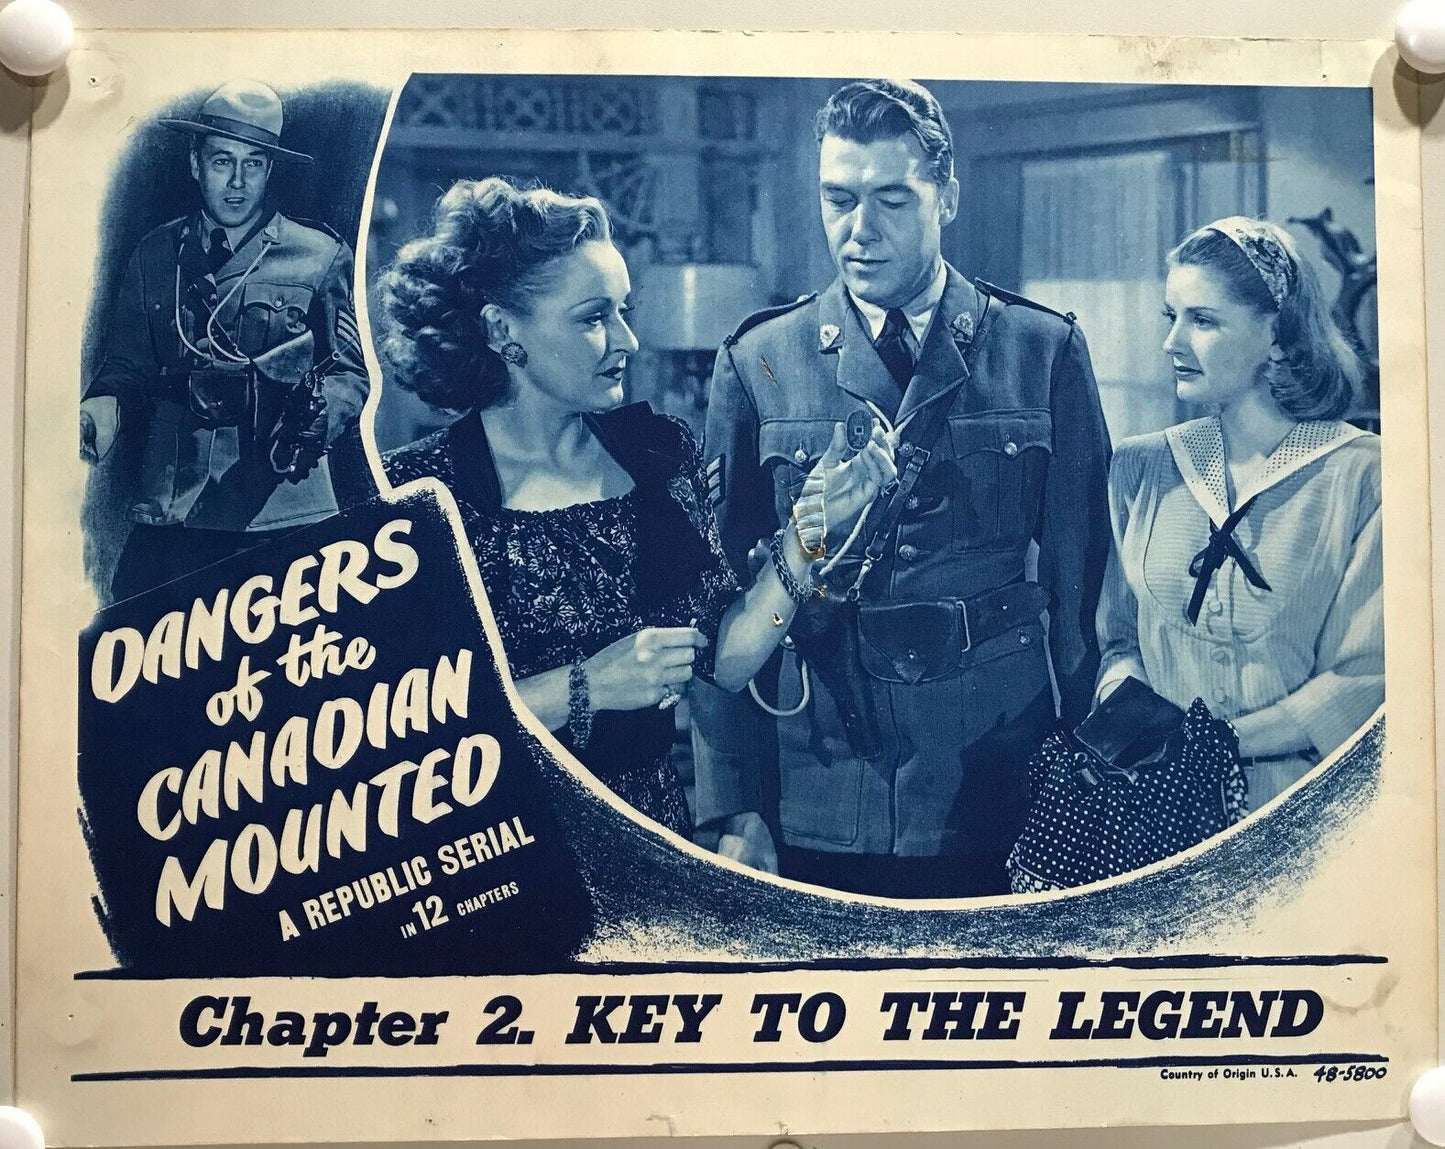 ORIGINAL SERIAL LOBBY CARD - DANGERS OF THE CANADIAN MOUNTED - 1948 - Ch 2